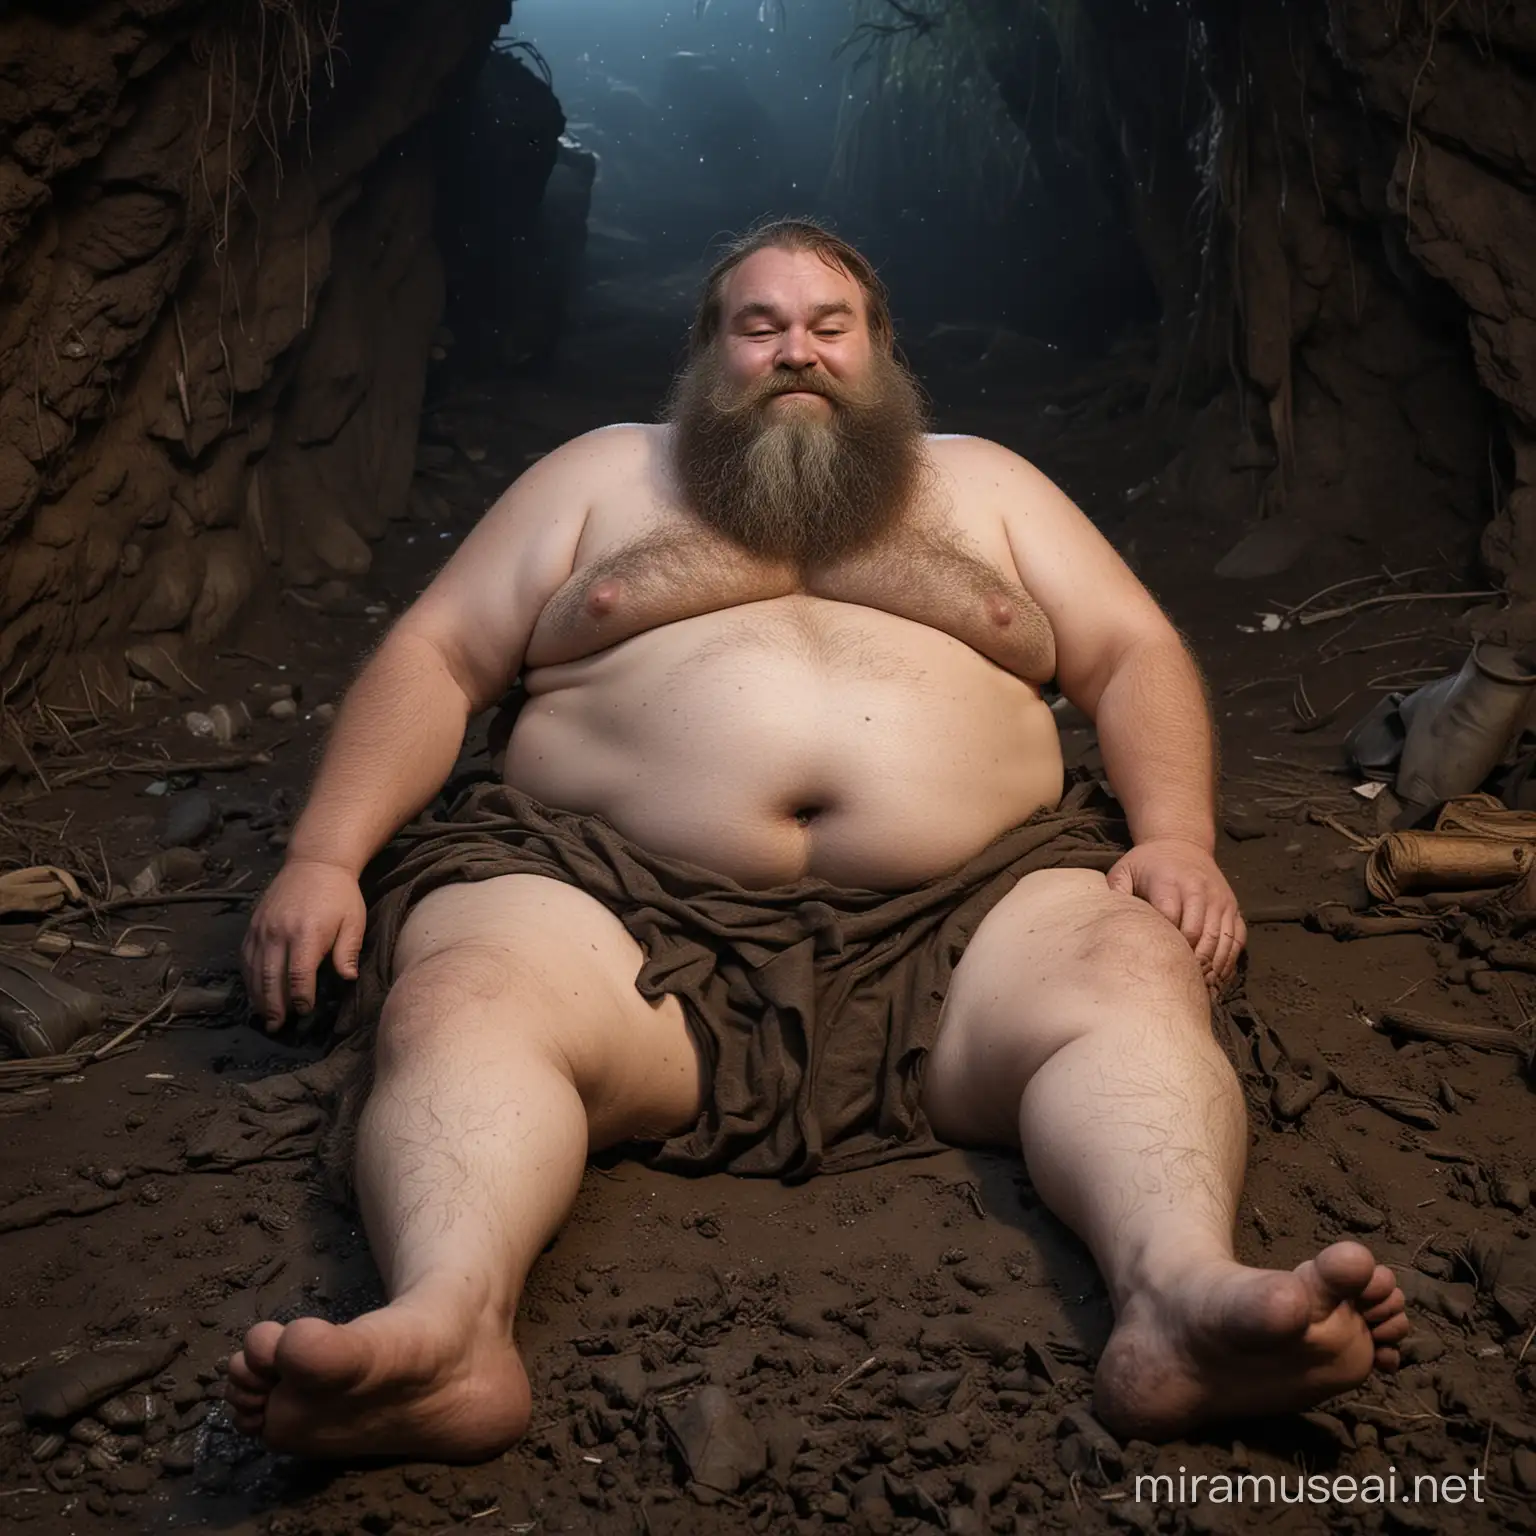 dwarf,forest cave,at midnight,bonfire,gigantic feet,thick feet,rough soles,loincloth,primitive,hairy,dumpy,chubby,shorty,long beard,rainy,lying on the ground,belly towards sky,dirty mud cover all over the body,sleeping